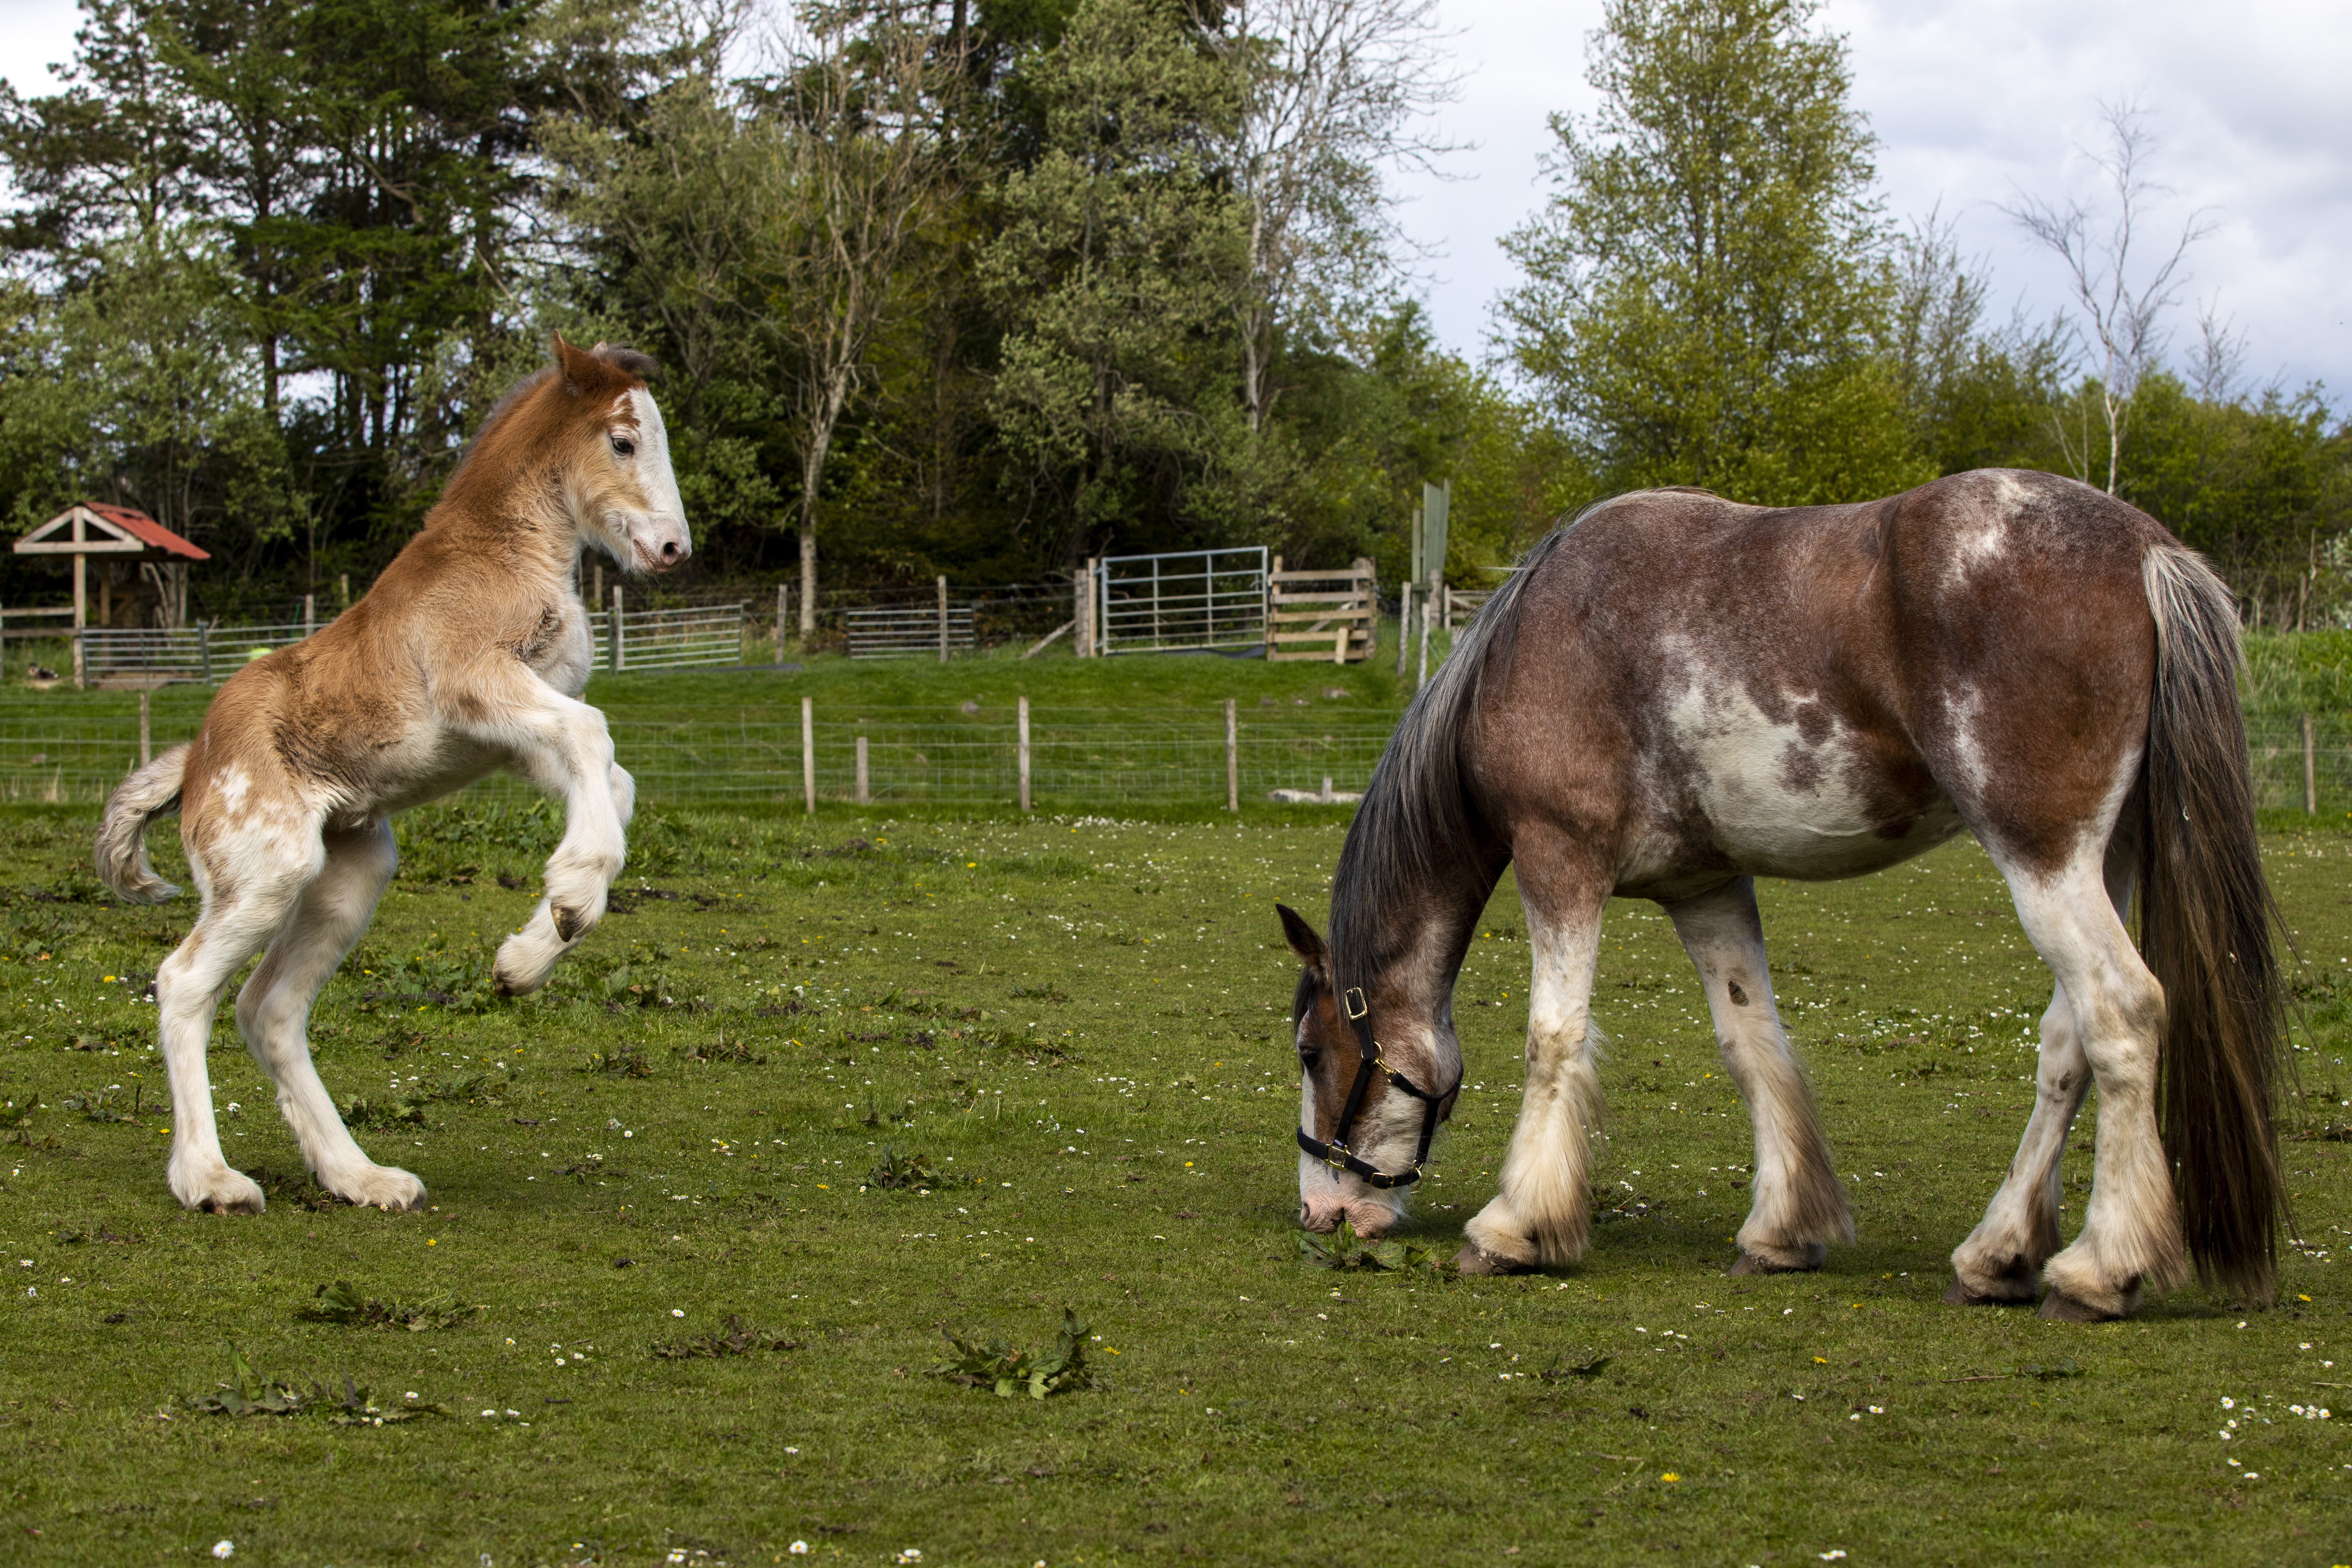 Rowan the Clydesdale foal plays in her field at Almond Valley Heritage Centre.